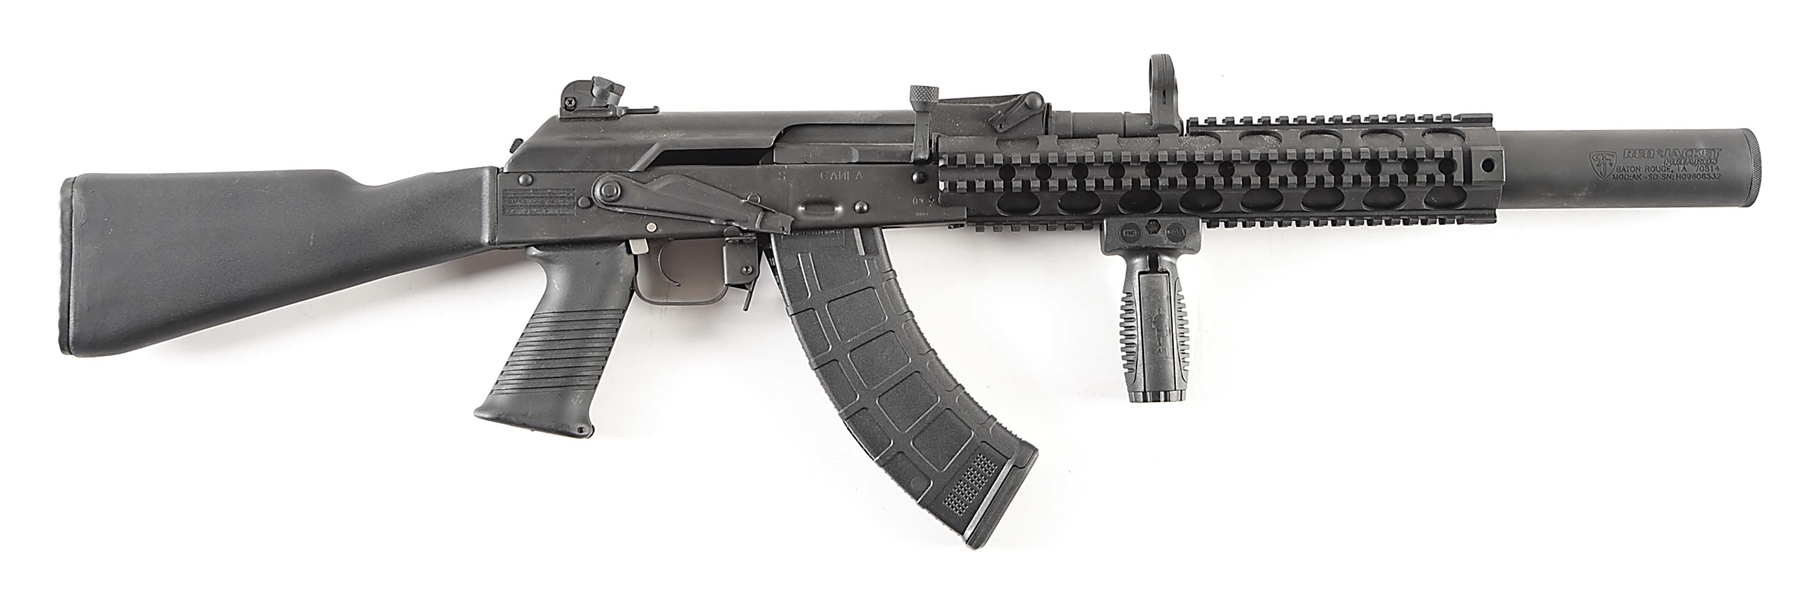 (N) IZHMASH SAIGA 7.62X39 SEMI-AUTOMATIC RIFLE WITH RED JACKET FIREARMS AKSD INTEGRALLY SUPPRESSED BARREL (SILENCER).